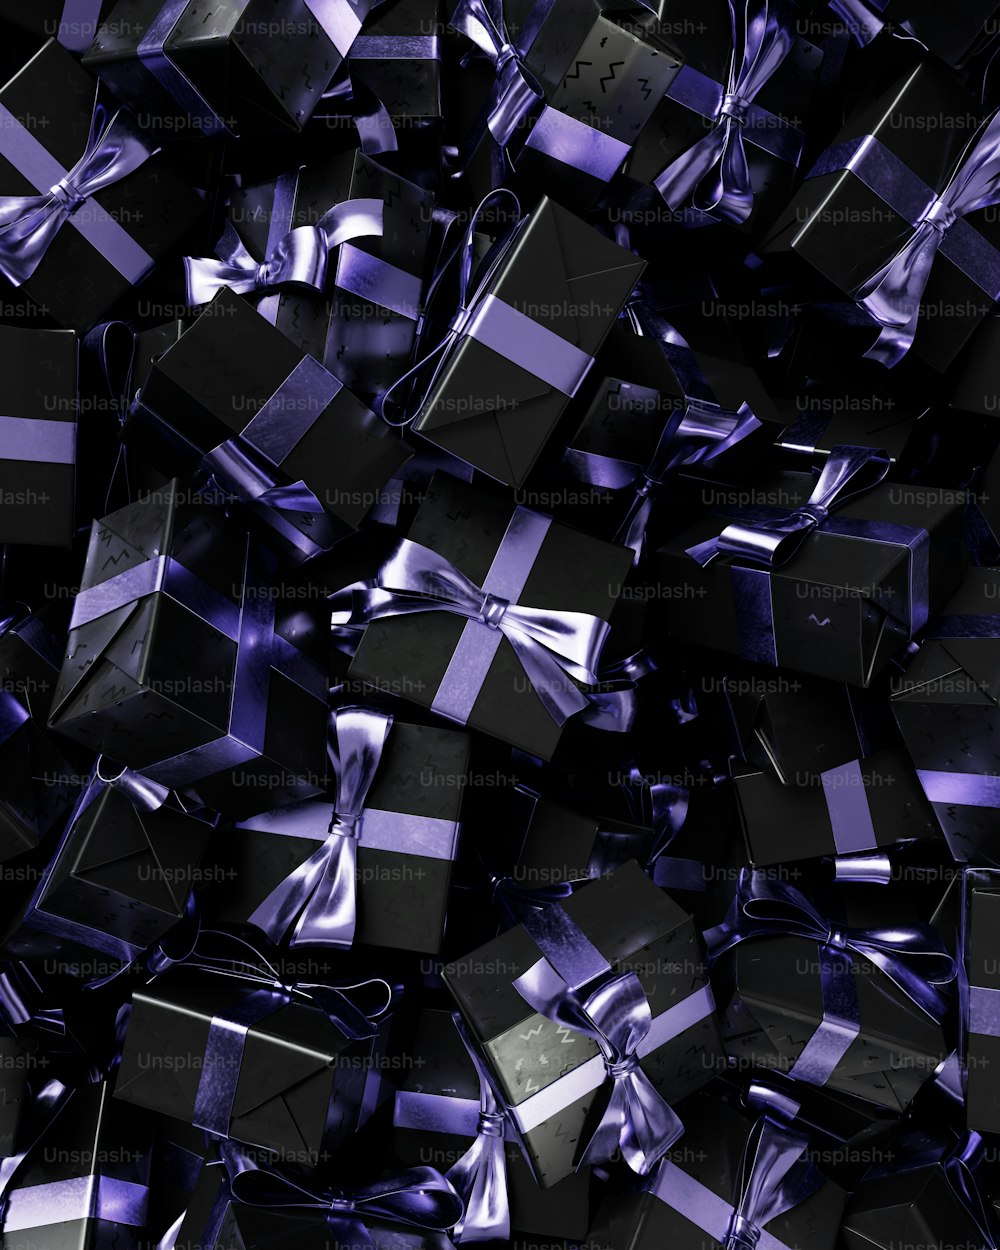 a pile of black and purple wrapped presents